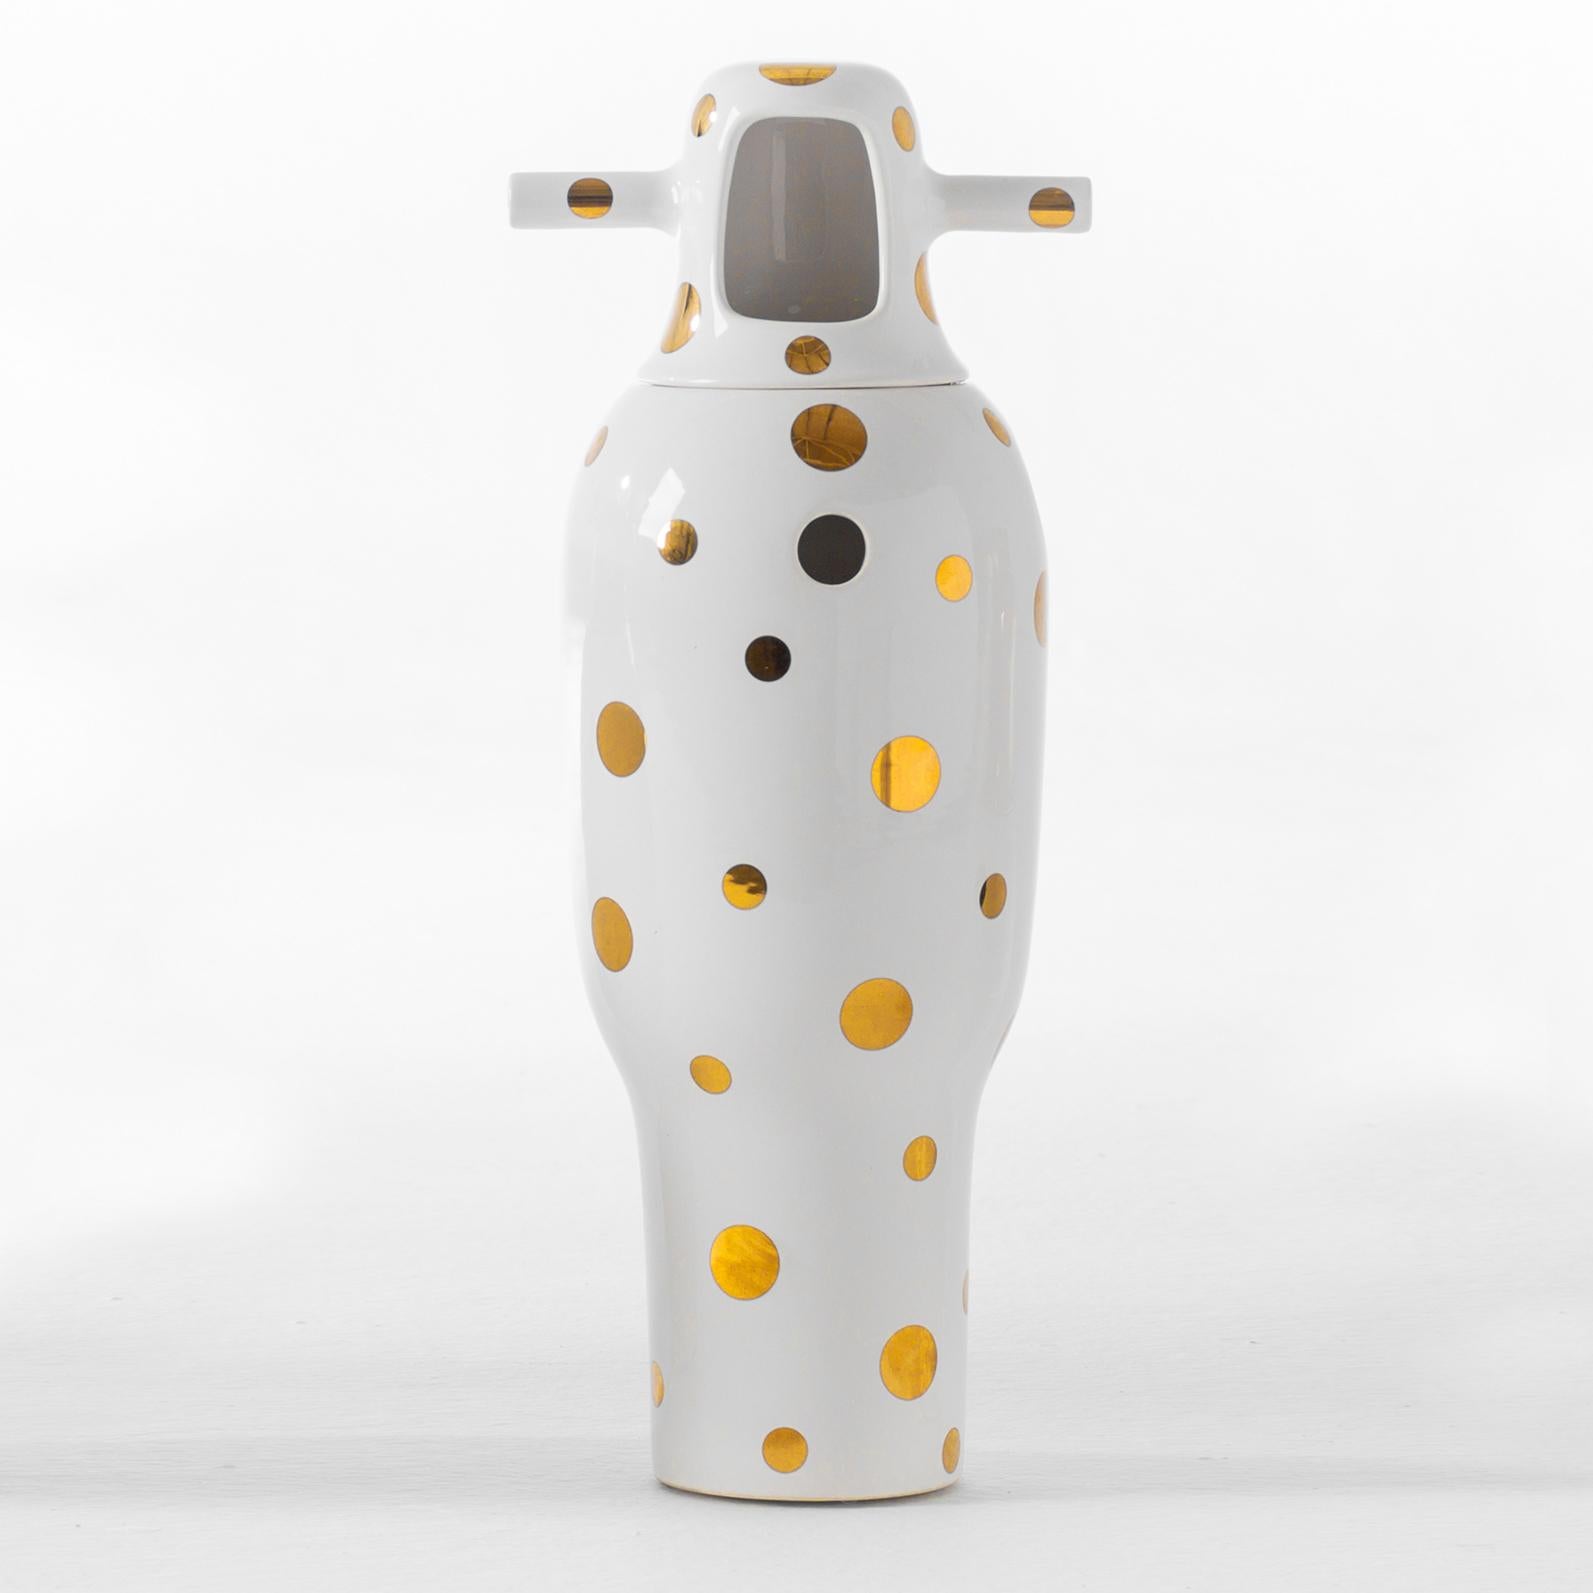 Jaime Hayon Contemporary Glazed Stoneware 'Showtime 10' Vase Number 4 In New Condition For Sale In Barcelona, Barcelona